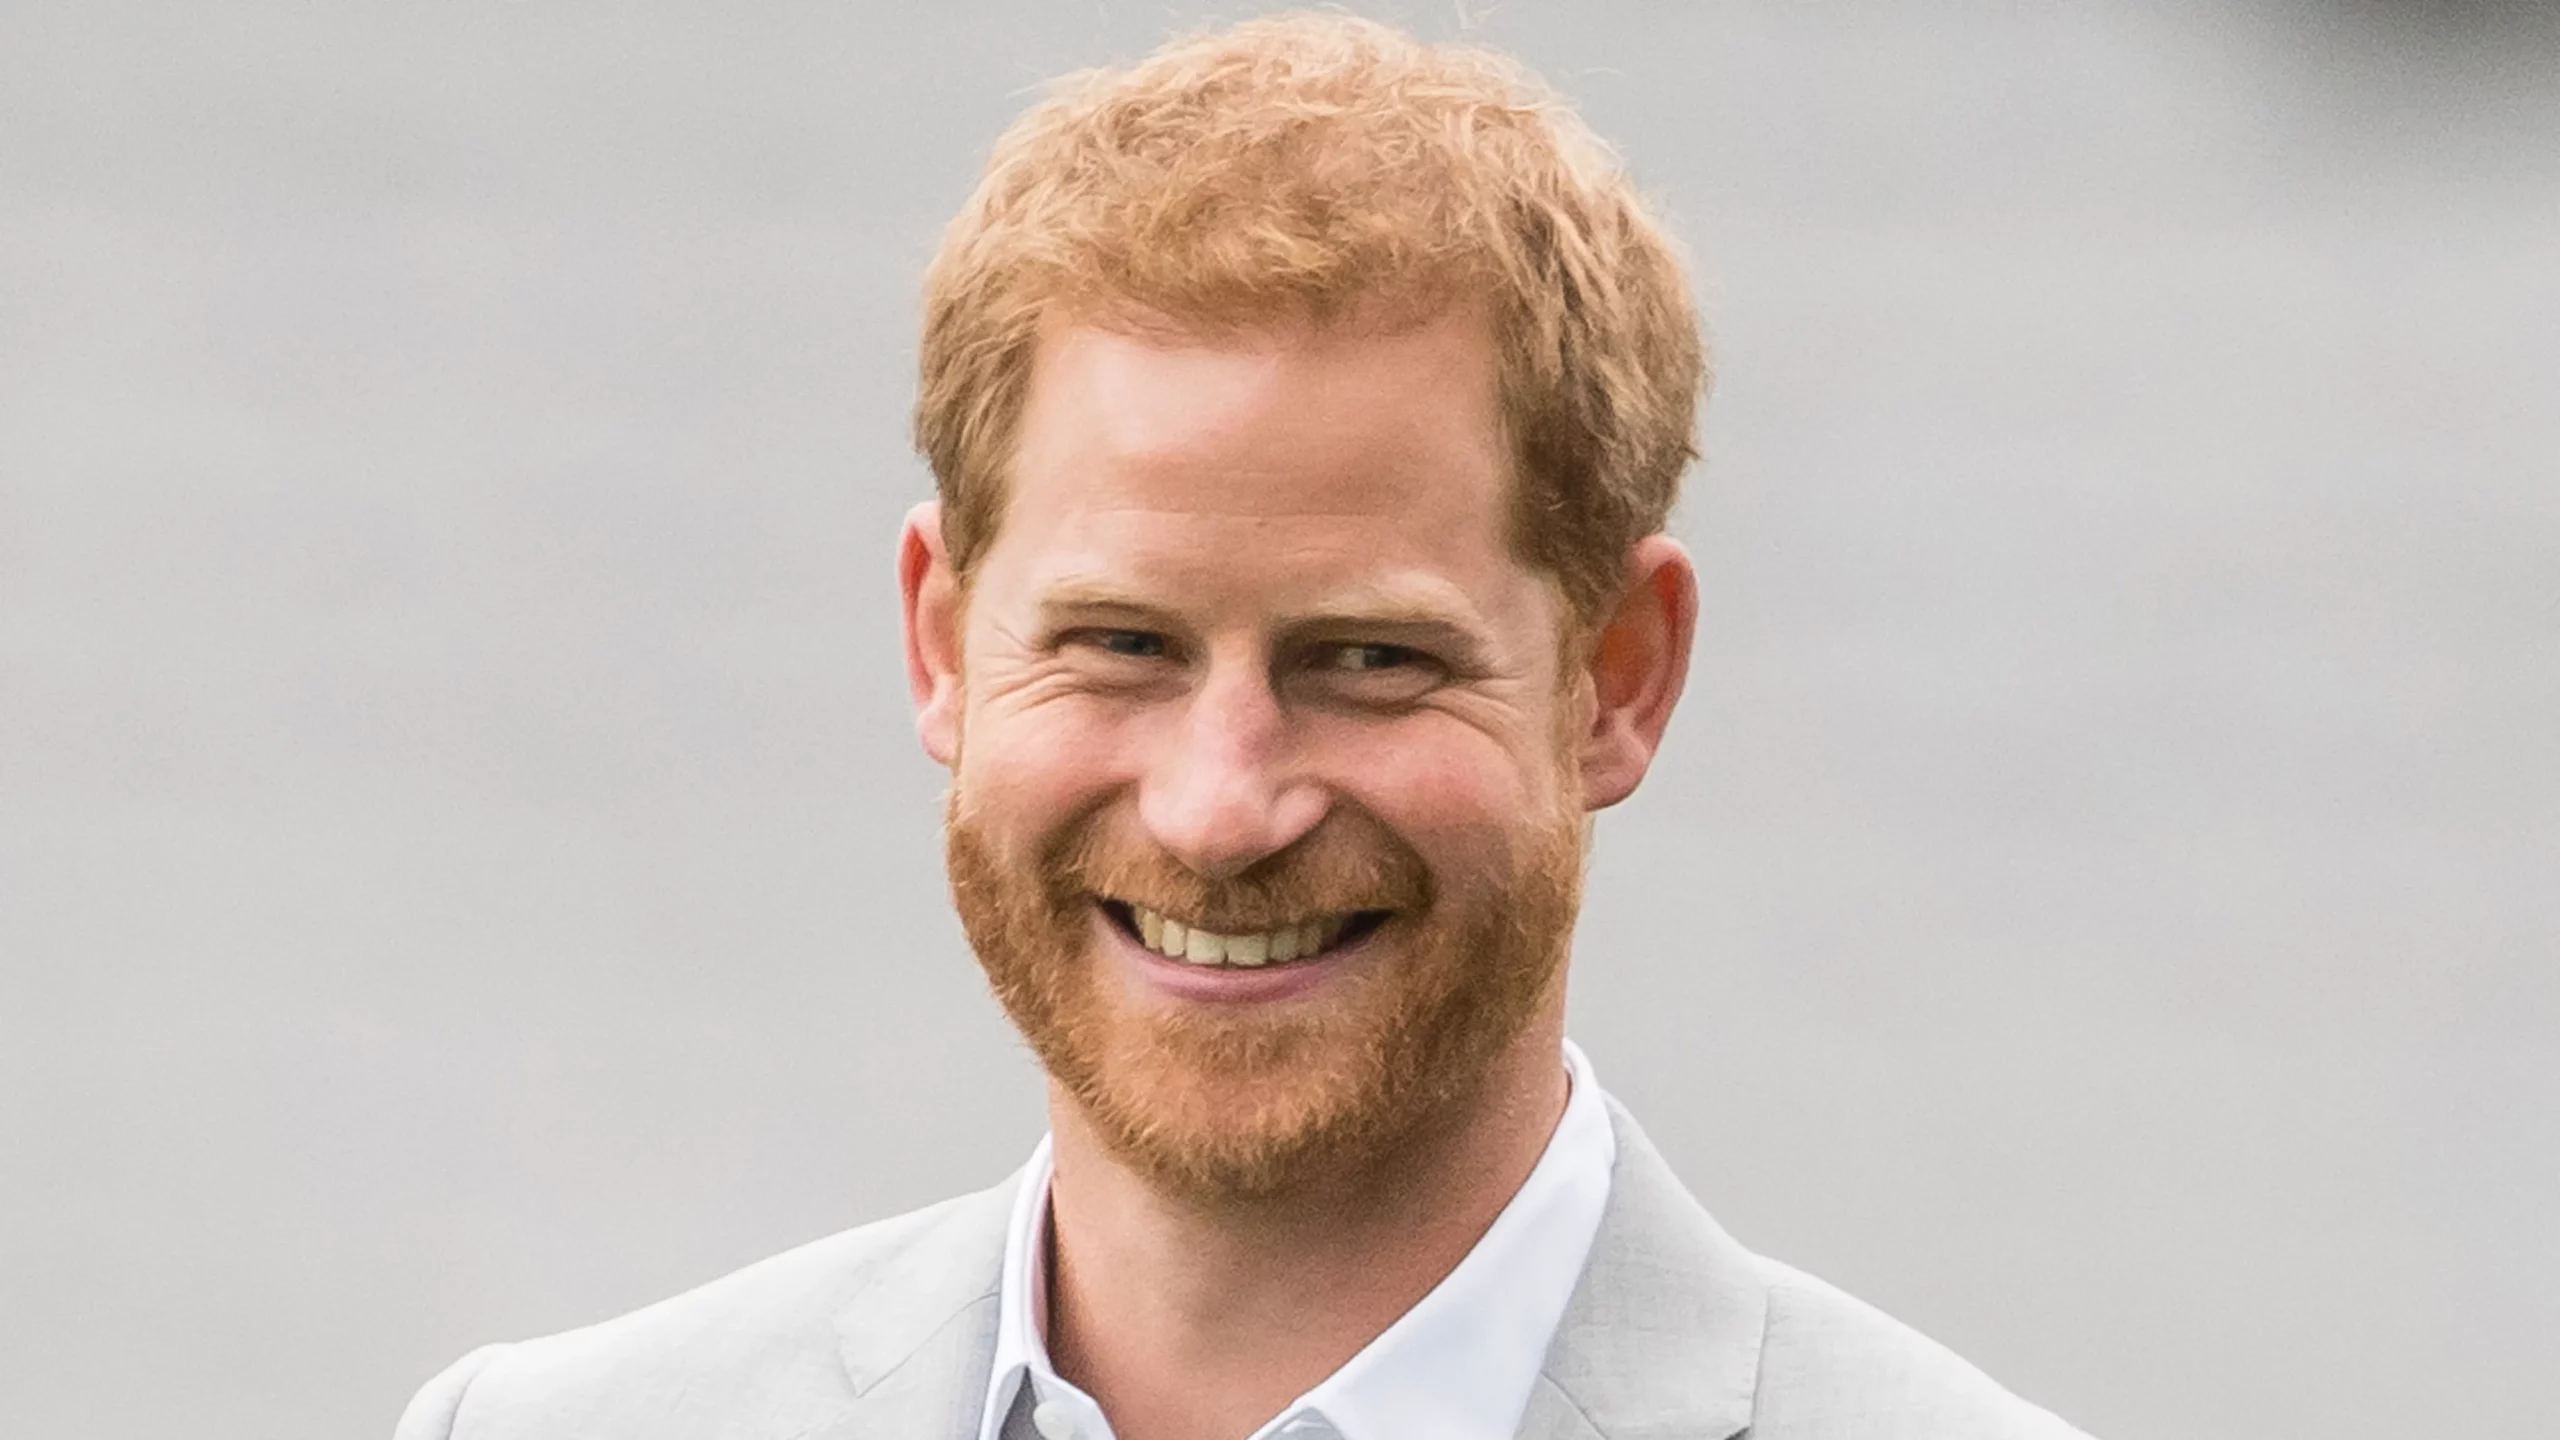 Prince Harry Duke of Sussex Biography